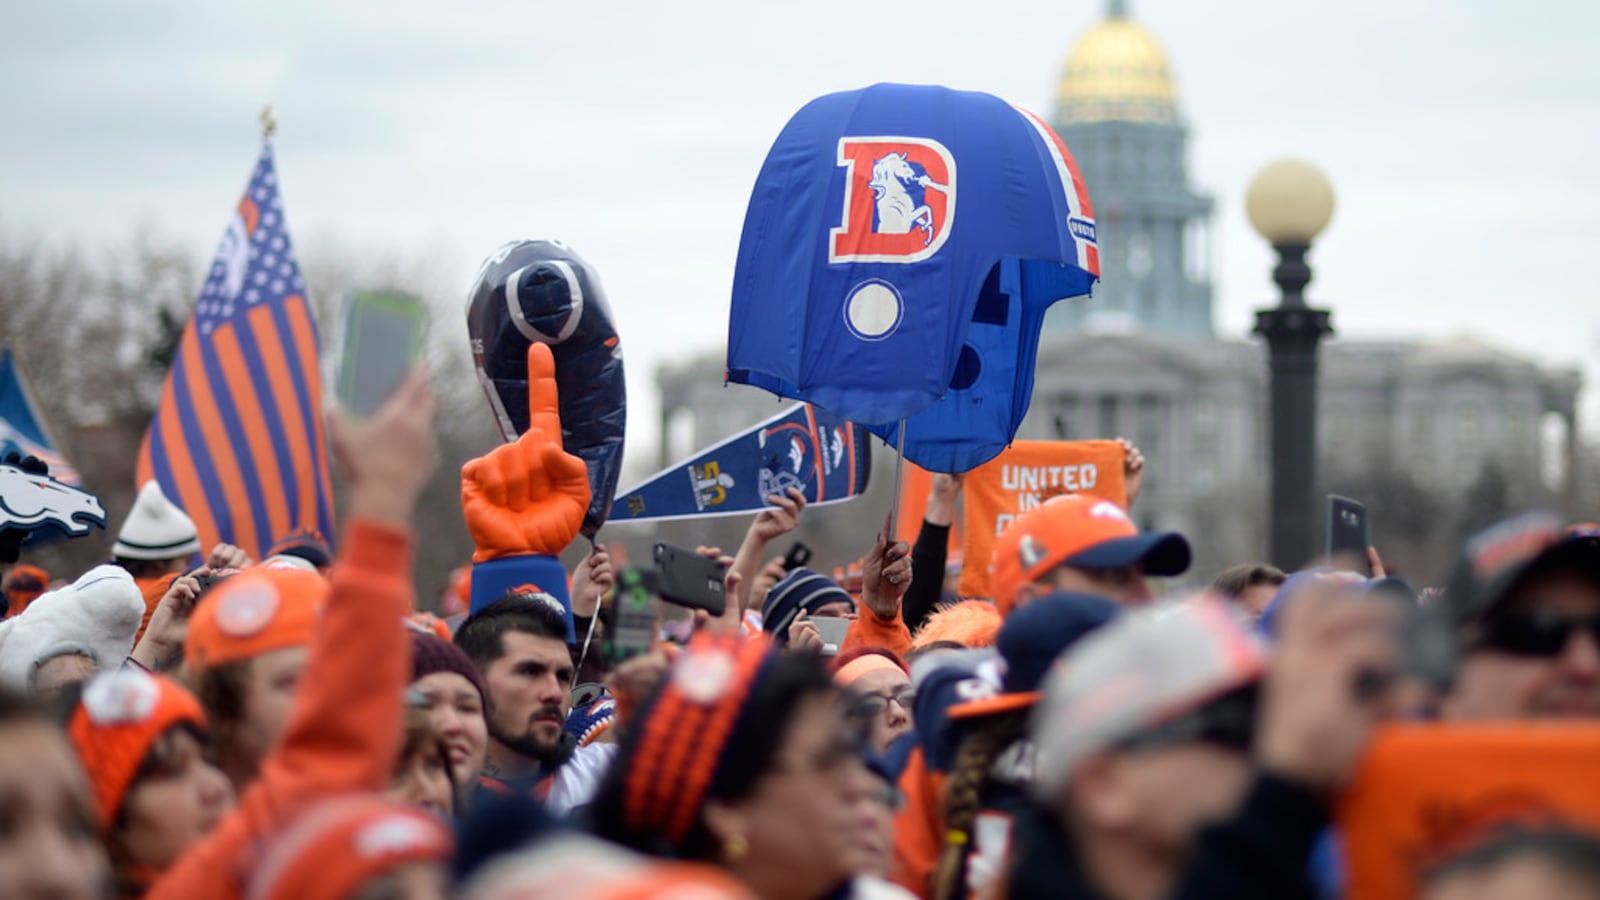 Broncos fans last gathered in Civic Center Park for a rally on Jan. 31 (Photo By AAron Ontiveroz/The Denver Post).